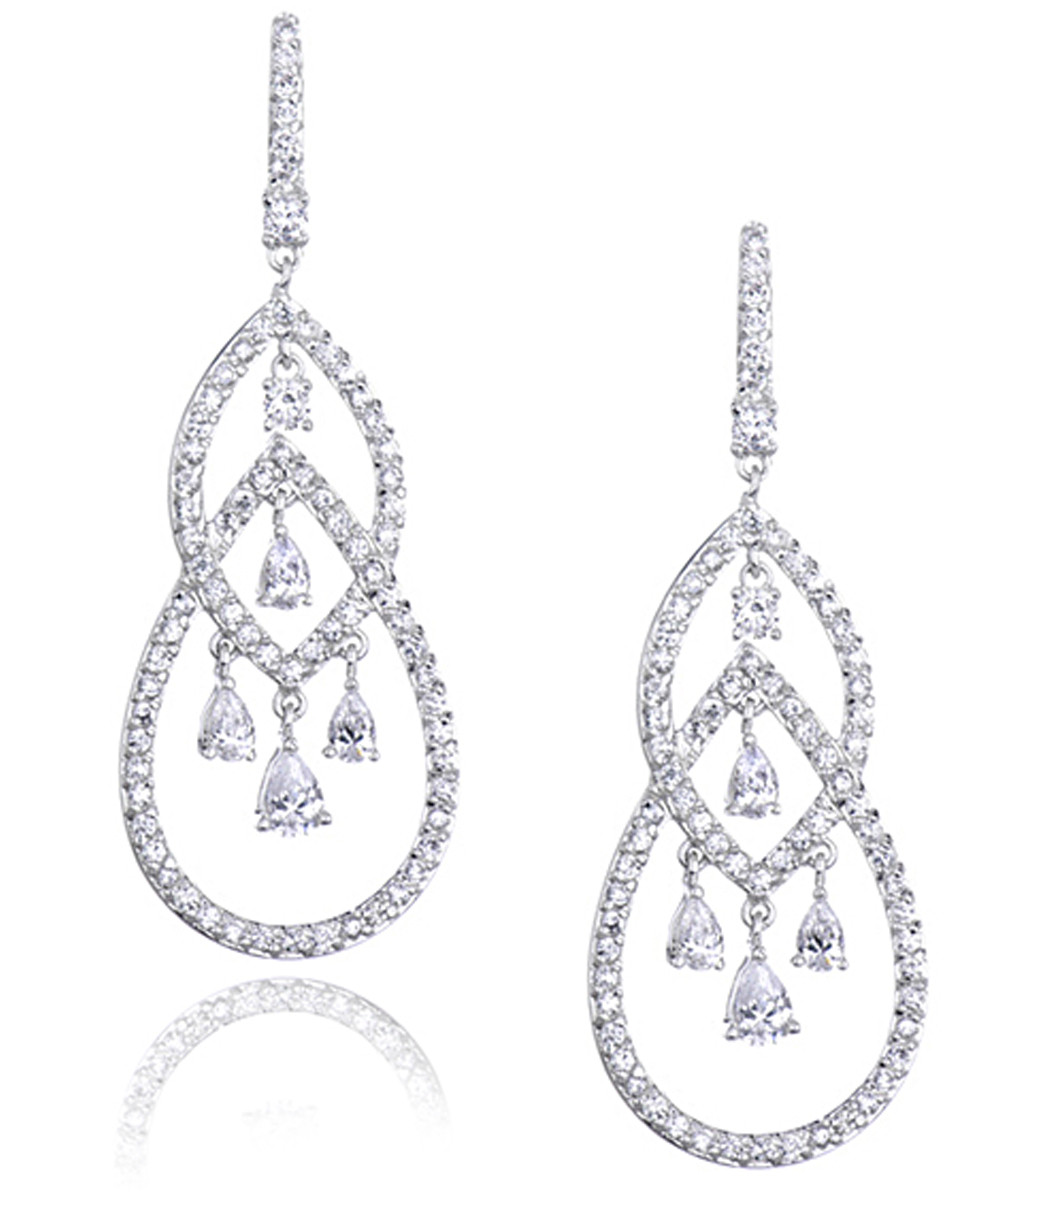 White Gold, Sapphire And Diamond Chandelier Earrings Available For  Immediate Sale At Sotheby's